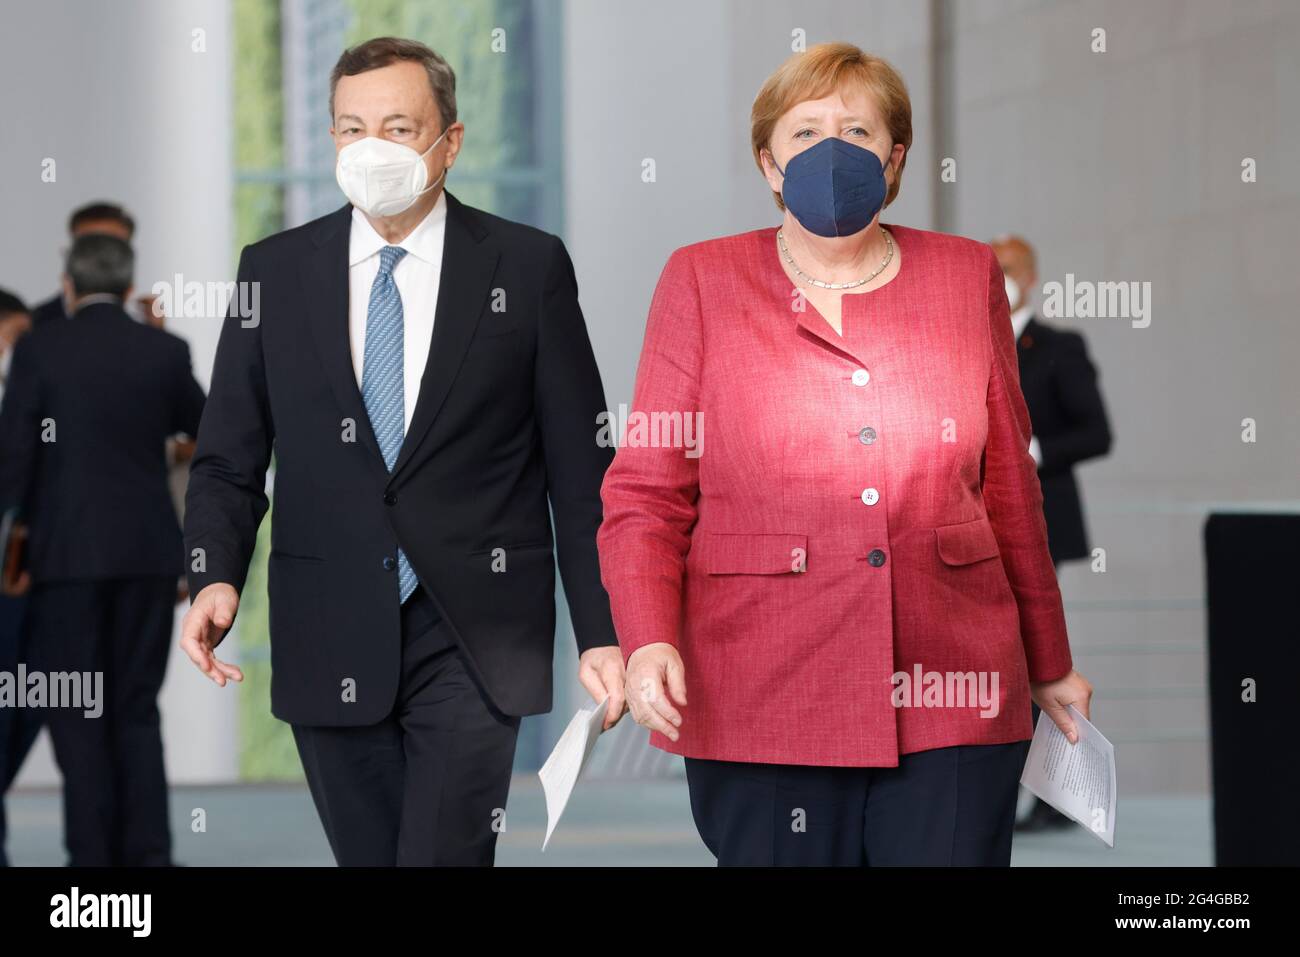 Berlin, Germany. 21st June, 2021. German Chancellor Angela Merkel (r, CDU) and Mario Draghi, Prime Minister of Italy, arrive for their press conference at the Federal Chancellery. Draghi is in Berlin for his inaugural visit. Credit: Odd Andersen/AFP-Pool/dpa/Alamy Live News Stock Photo